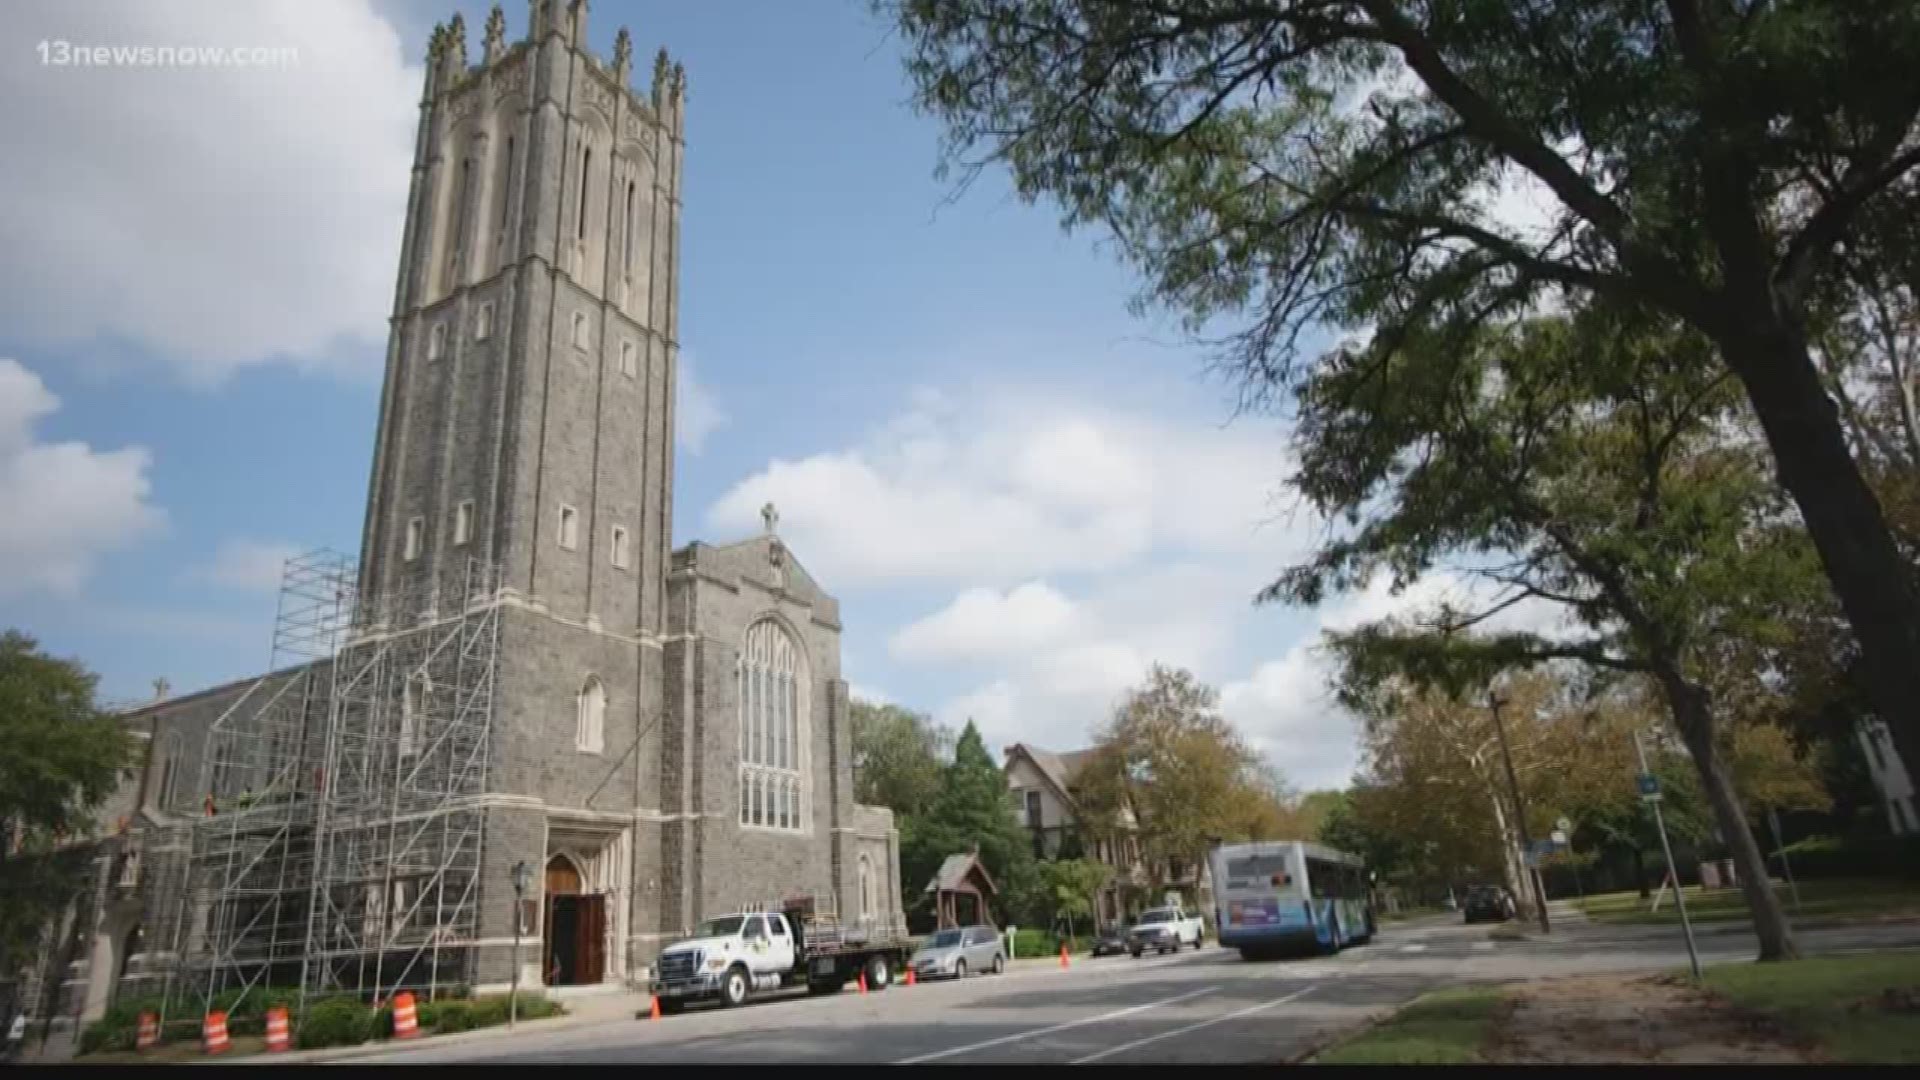 13News Now Philip Townsend stopped by Christ and Saint Luke's Episcopal Church in Norfolk to check on the church's renovation project.